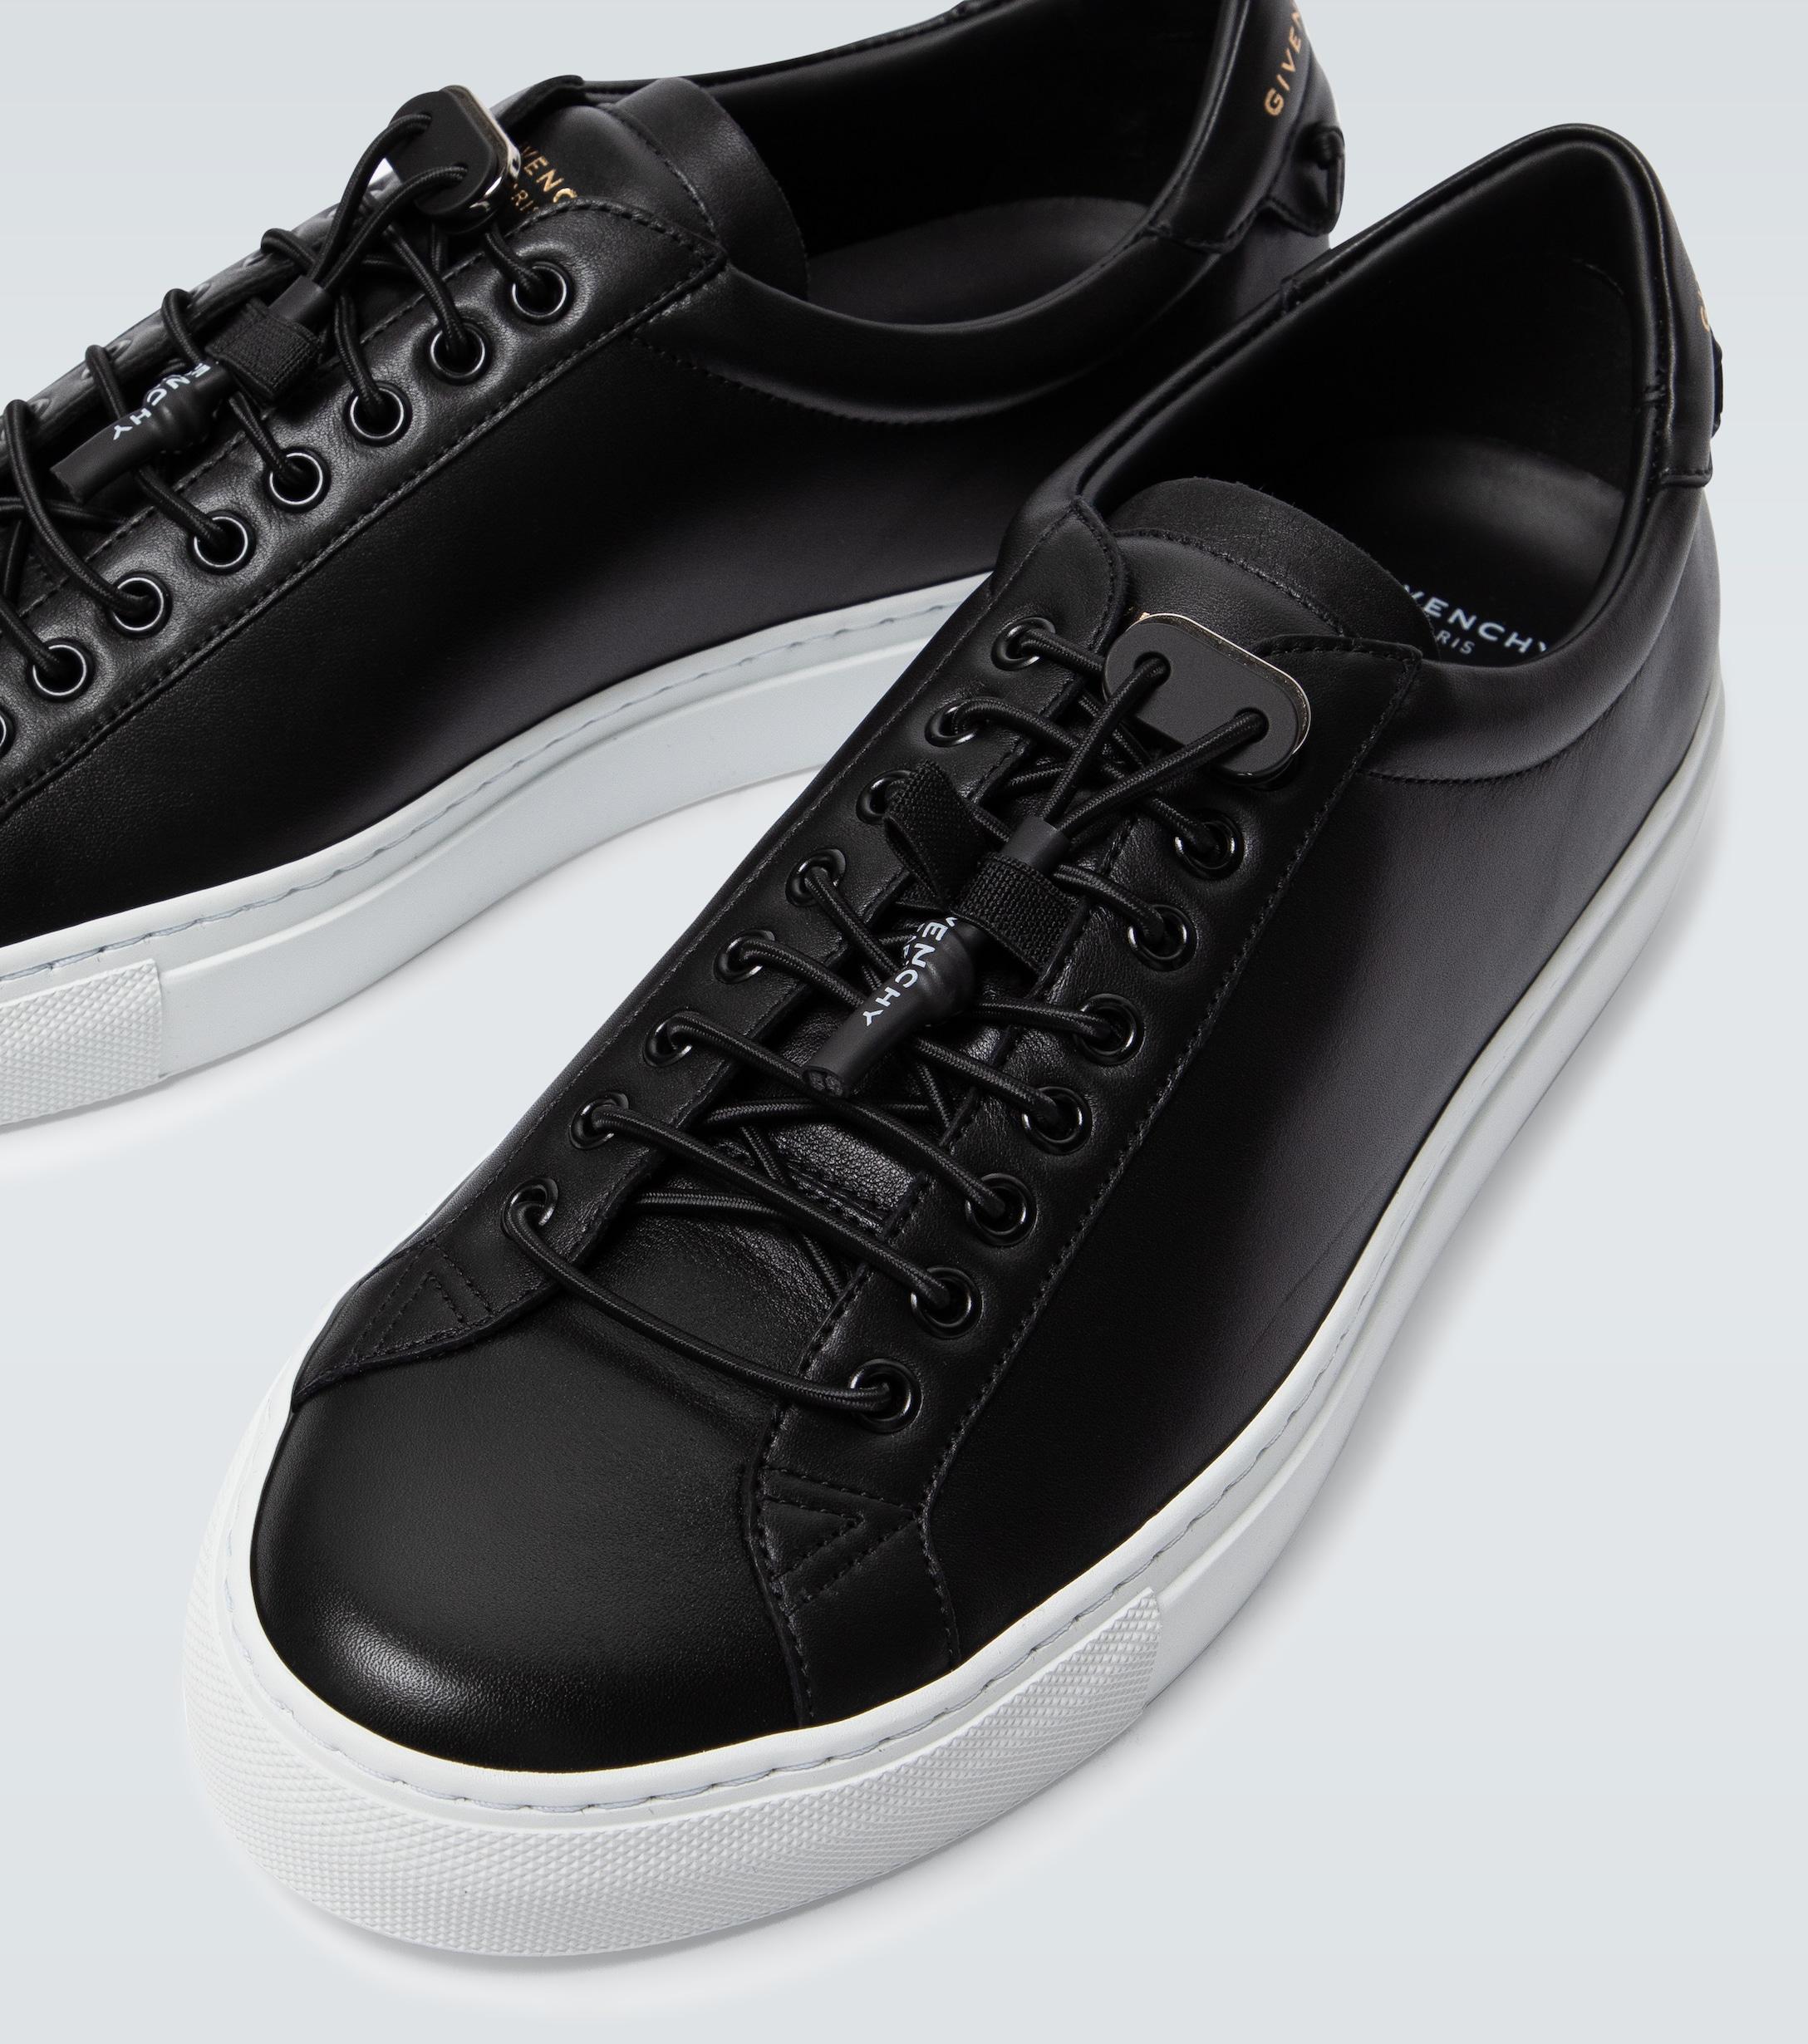 Givenchy Urban Street Leather Sneakers in Black for Men - Save 71% - Lyst